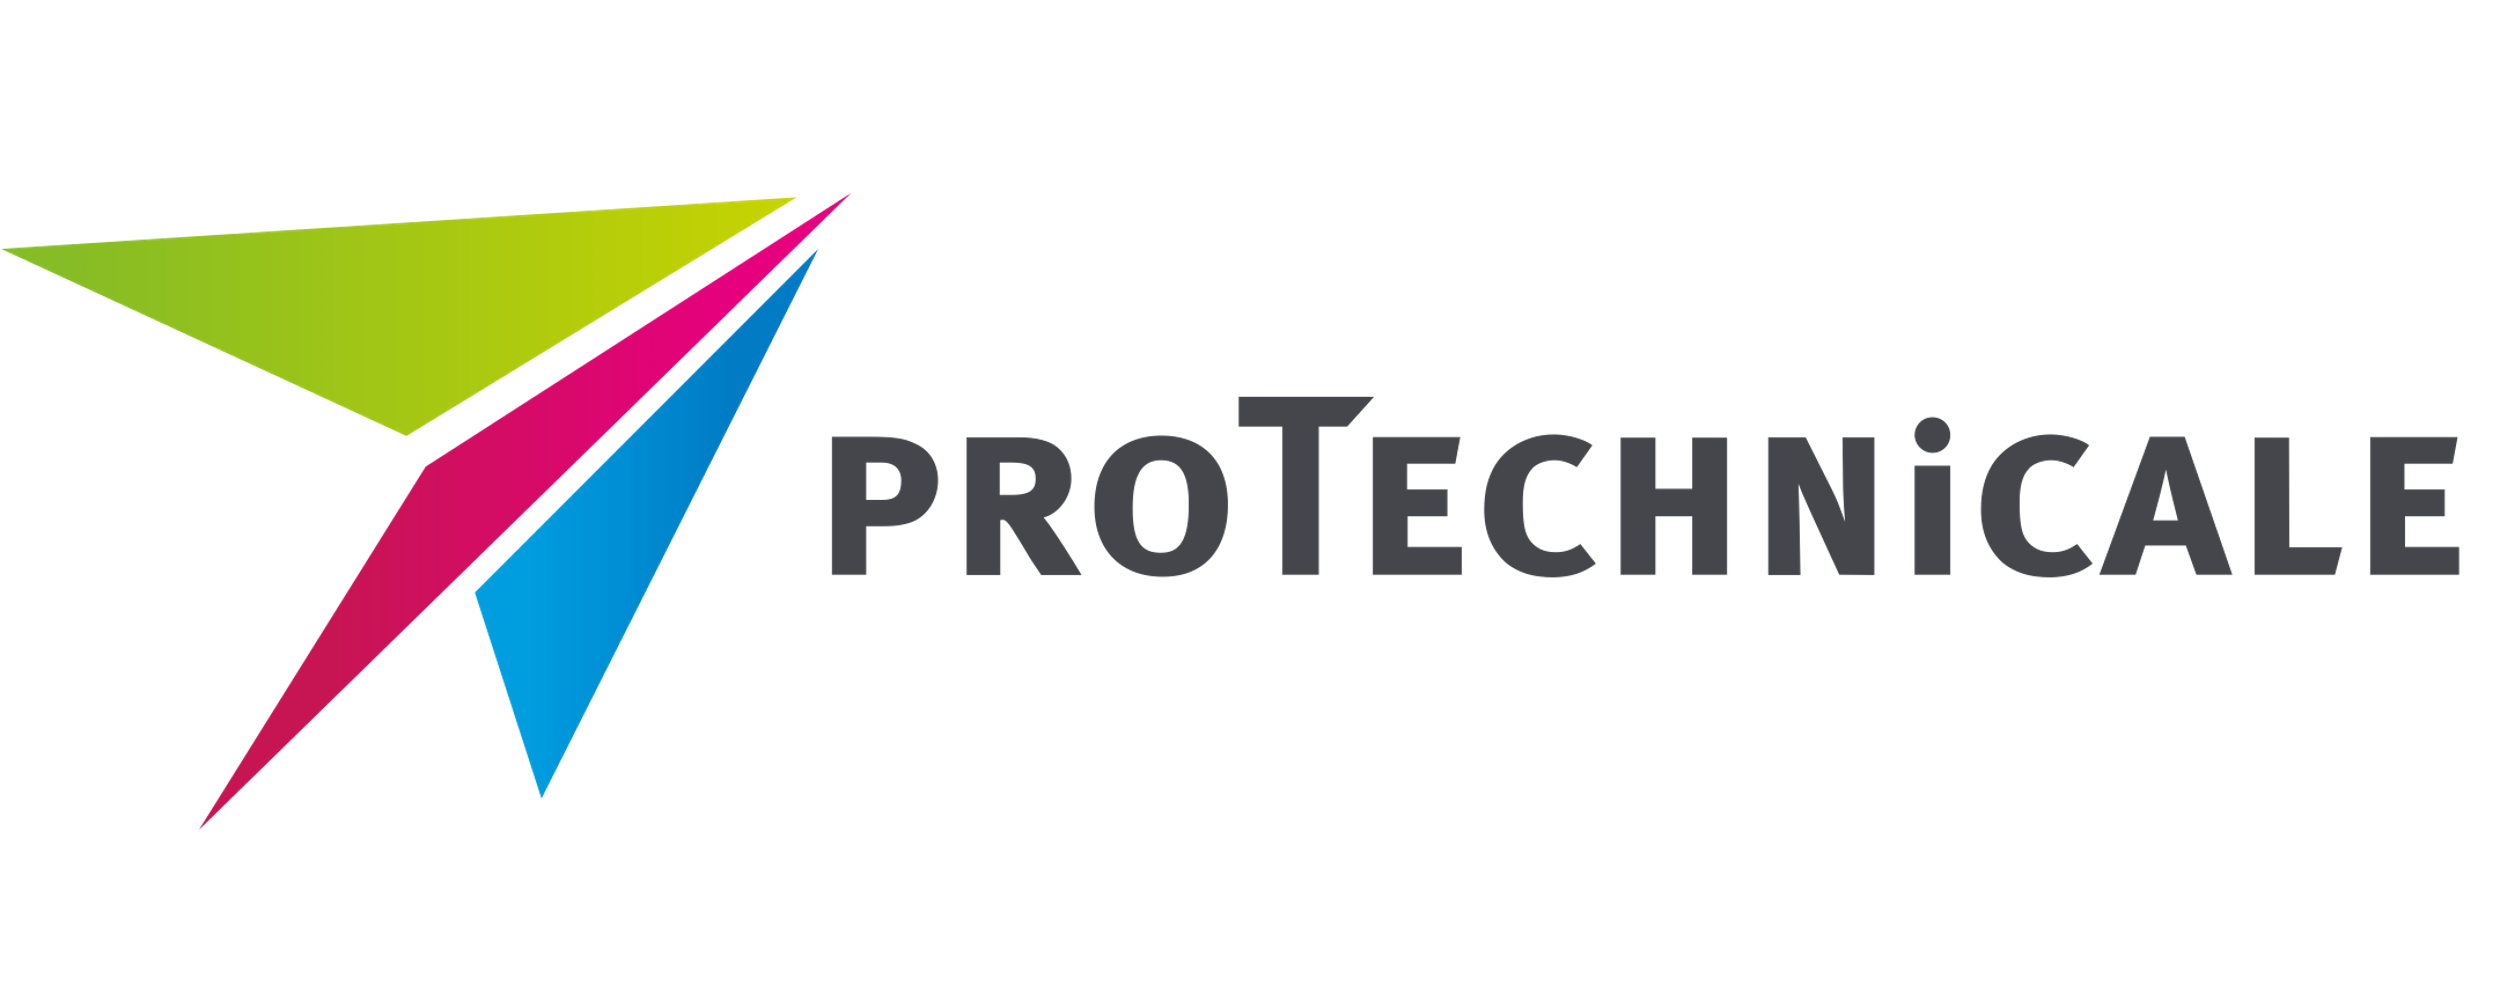 Logo: proTechnicale